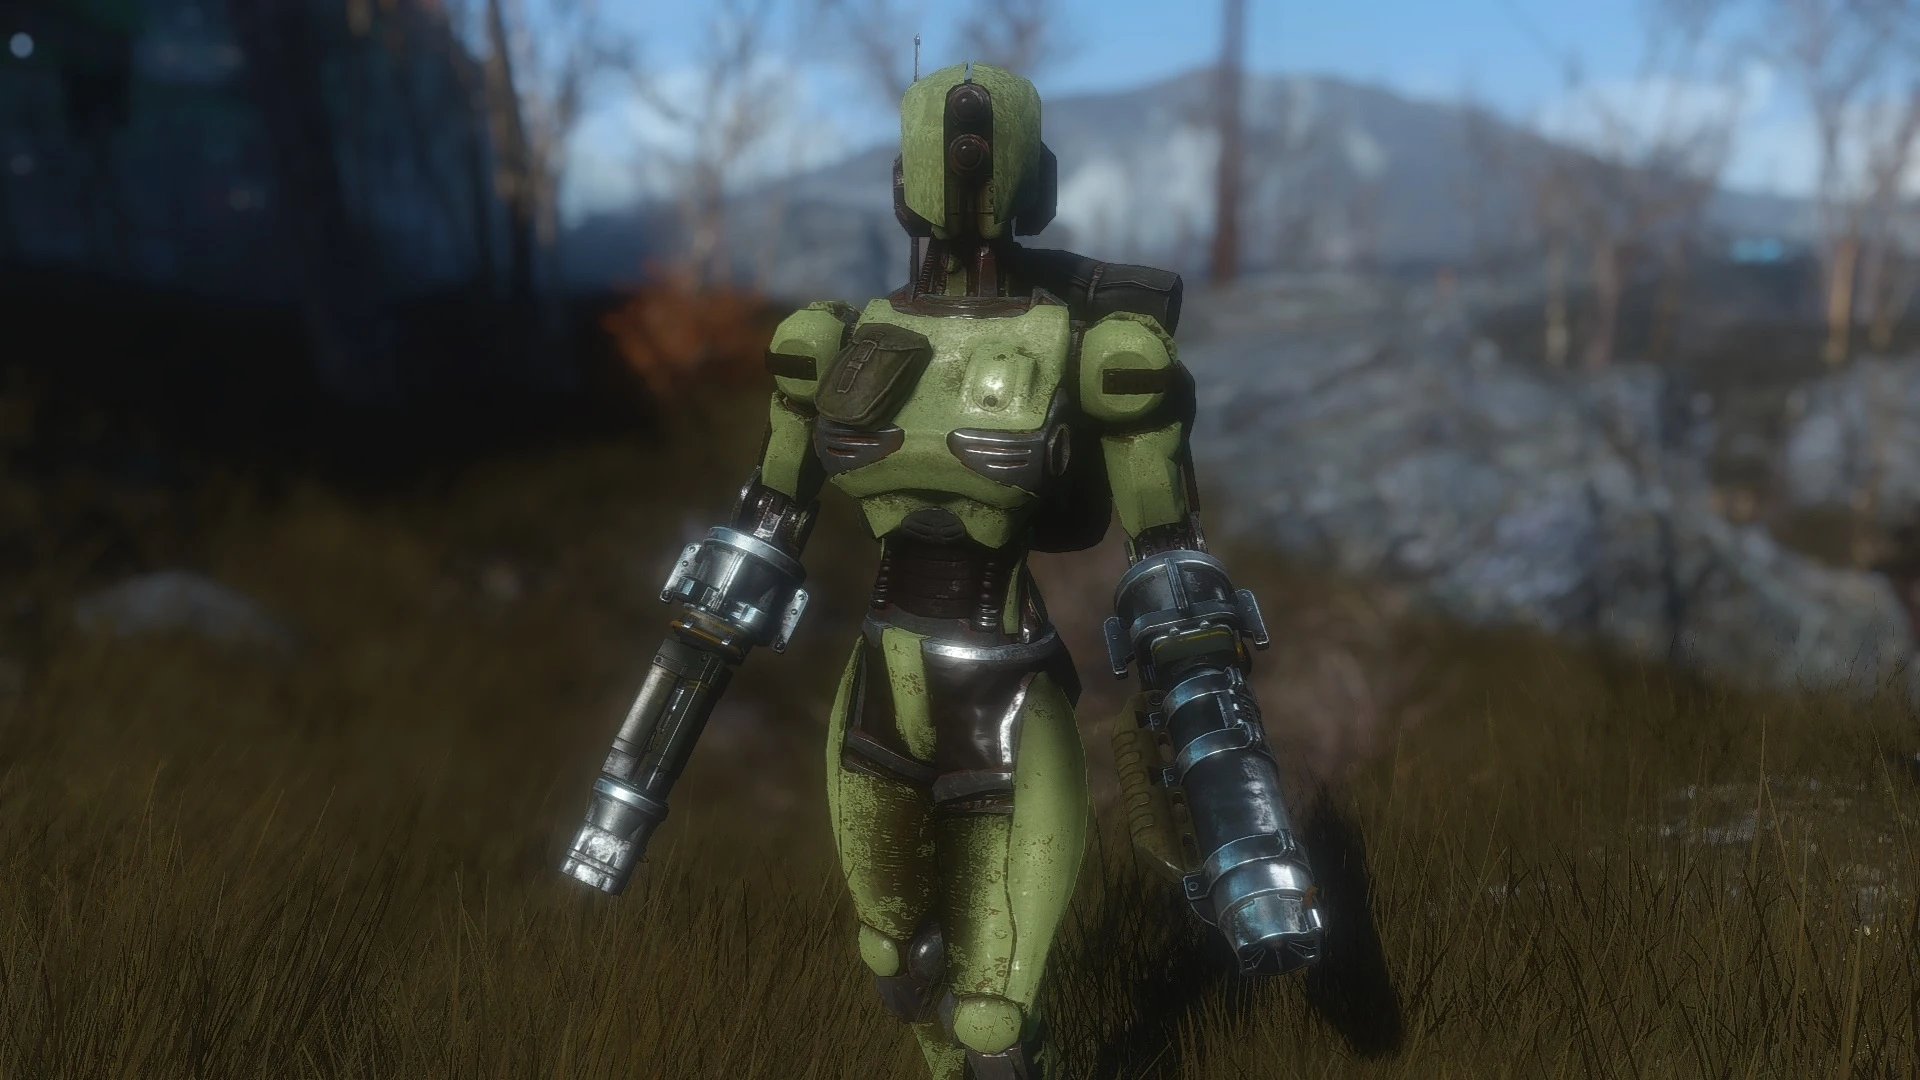 Even More Rilf Assaultron At Fallout 4 Nexus Mods And Community